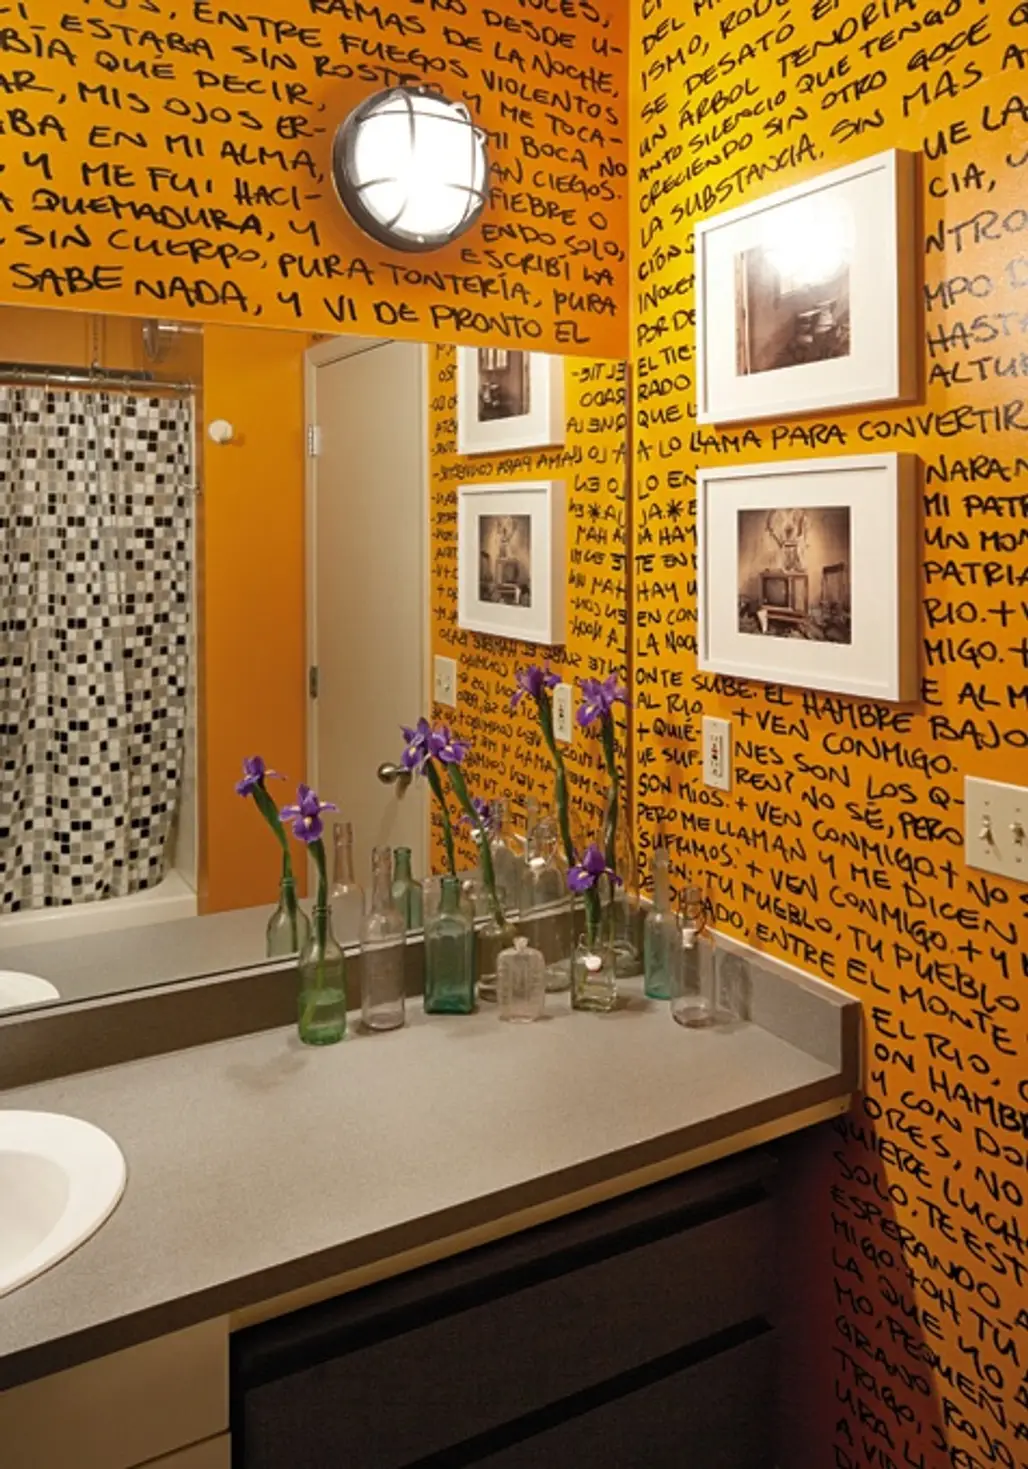 The Writing on the Walls